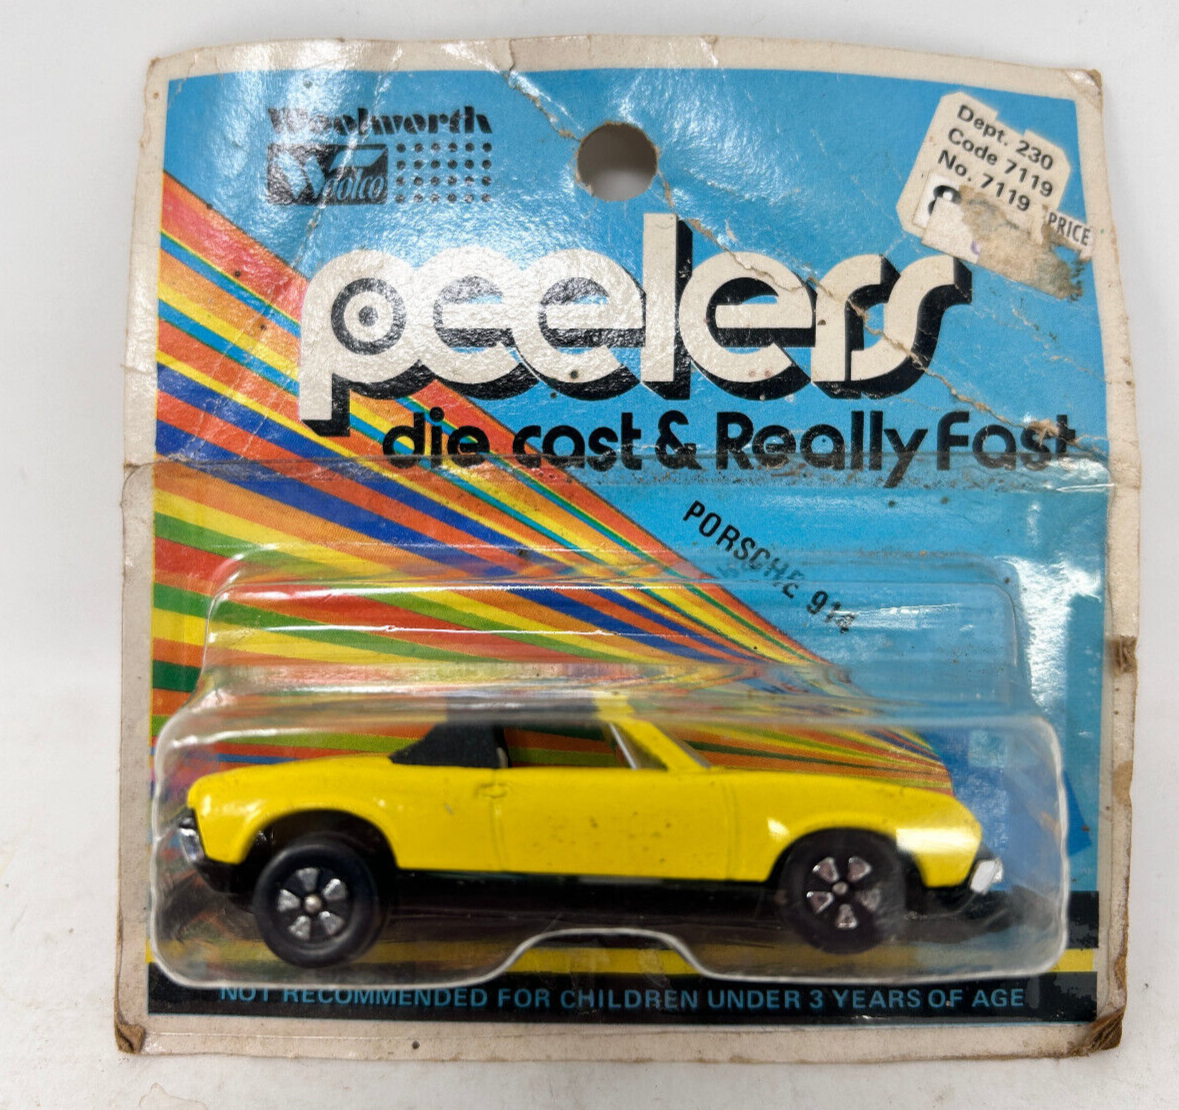 Primary image for Woolworth Woolco Peelers Yellow Porsche 914 Playart Damaged Card